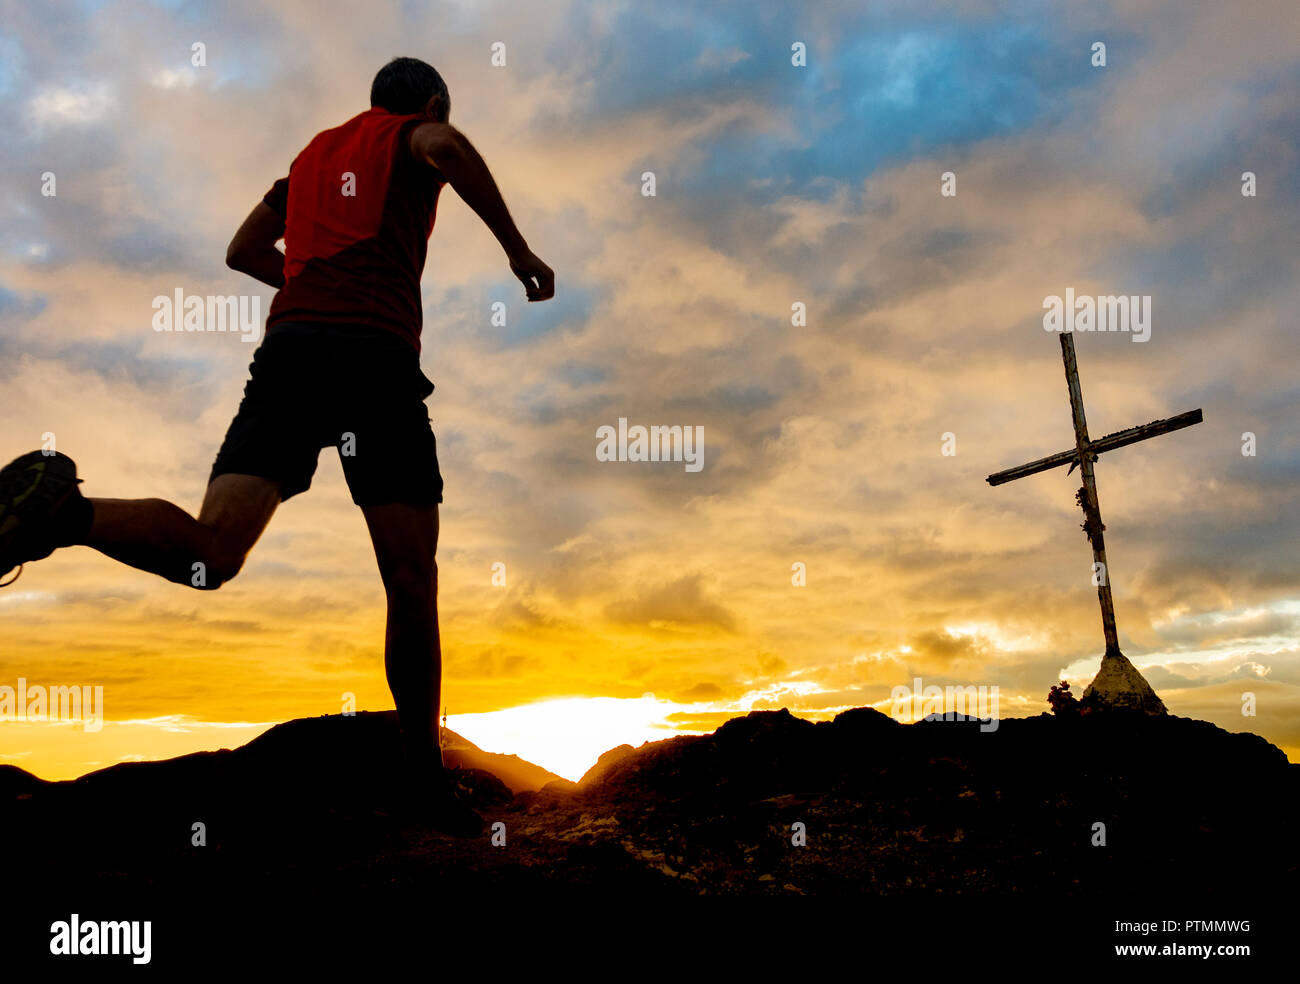 Las Palmas, Gran Canaria, Canary Islands, Spain. 10th October 2018. Weather:  A trail runner on mountain summit at sunrise on Gran Canaria on World  Mental Health Day. Credit: ALAN DAWSON/Alamy Live News